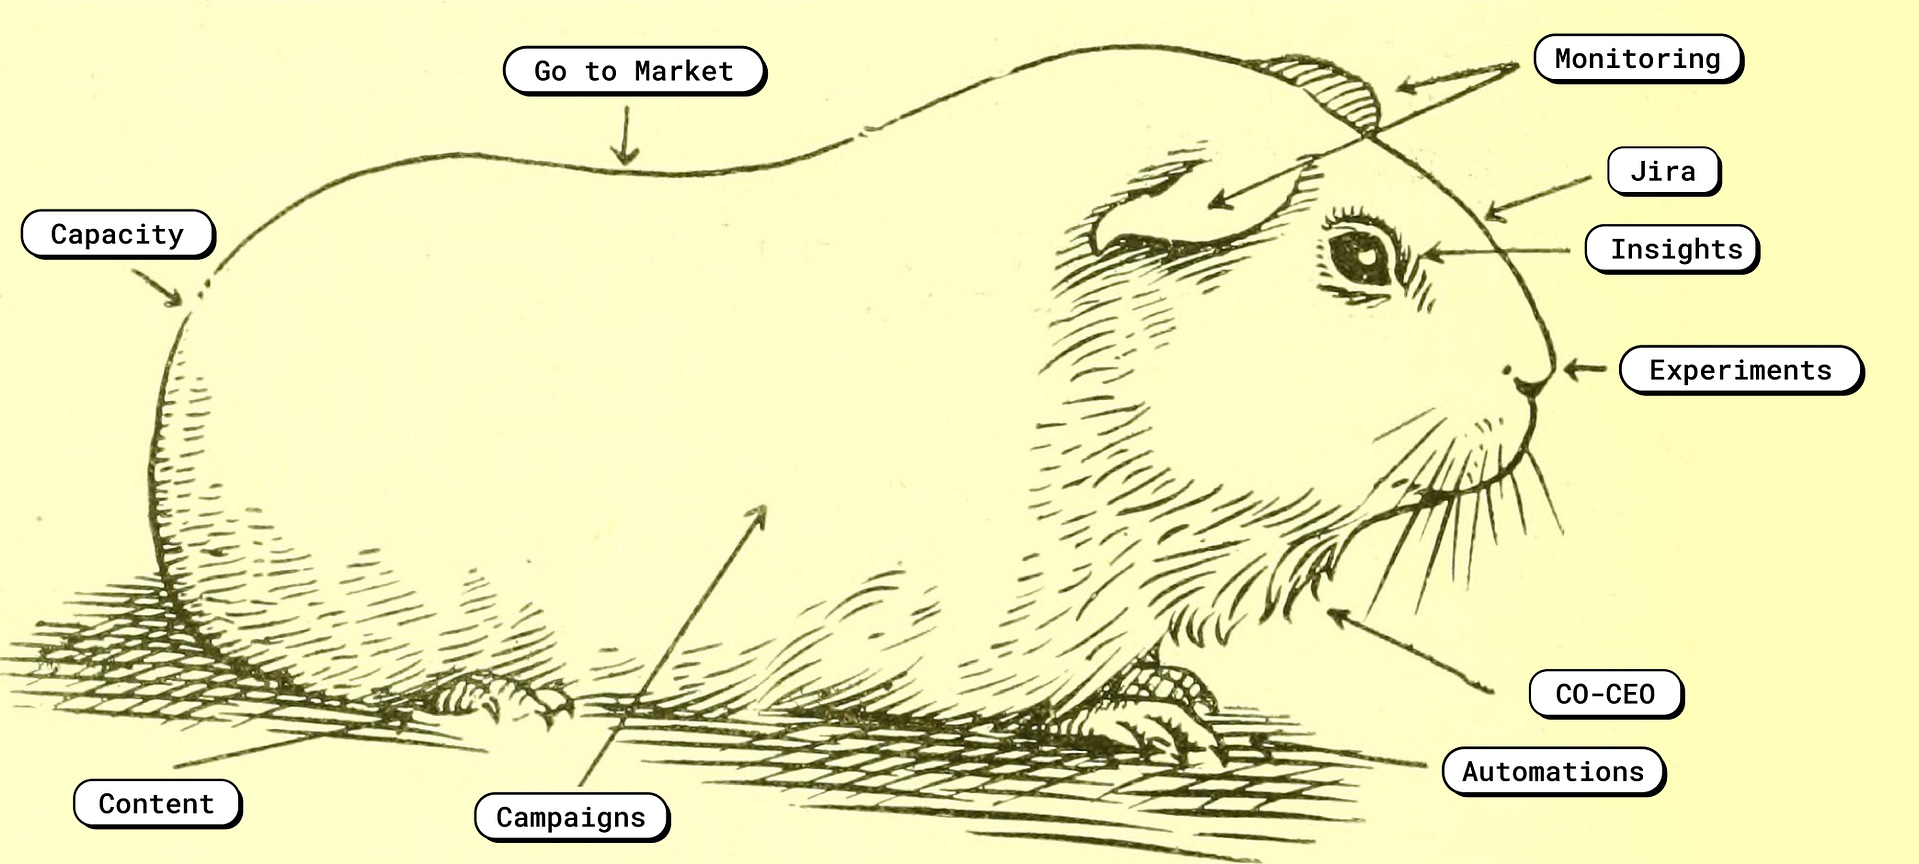 A Marketing Guinea Pig and its body parts